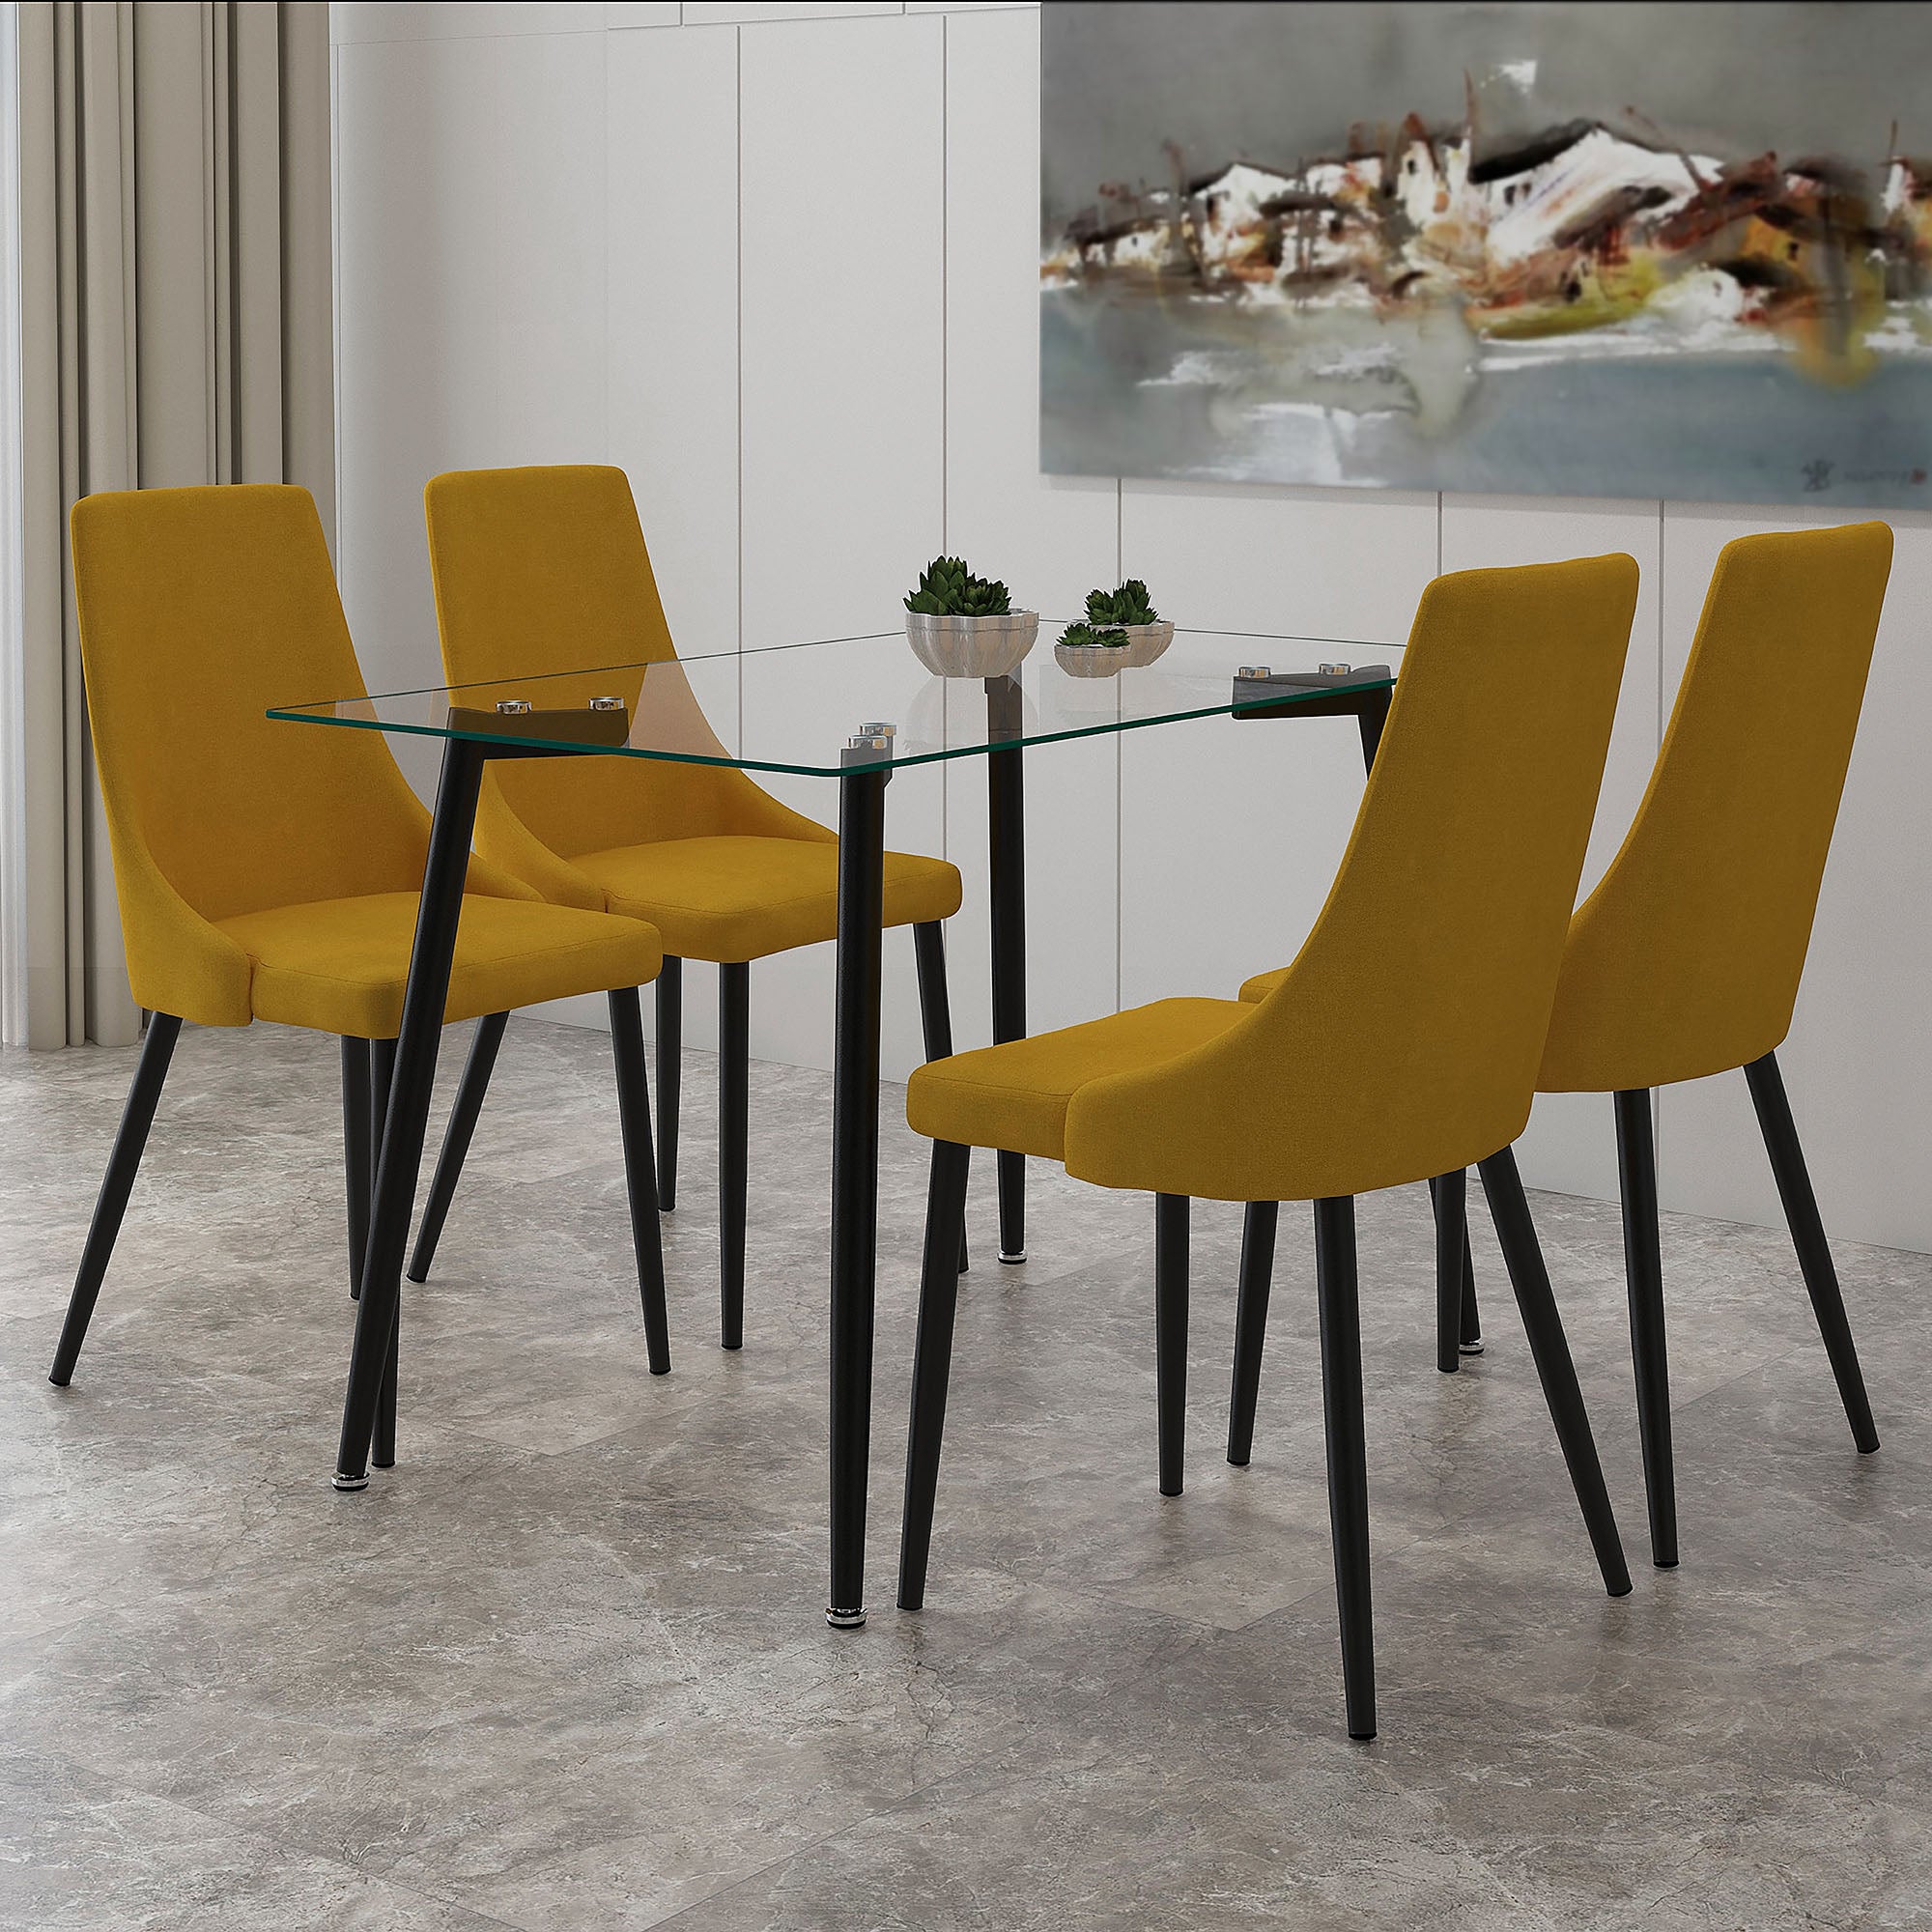 ABBOT 48" GLASS TABLE / VENICE MUSTARD CHAIRS -5PC DINING SET